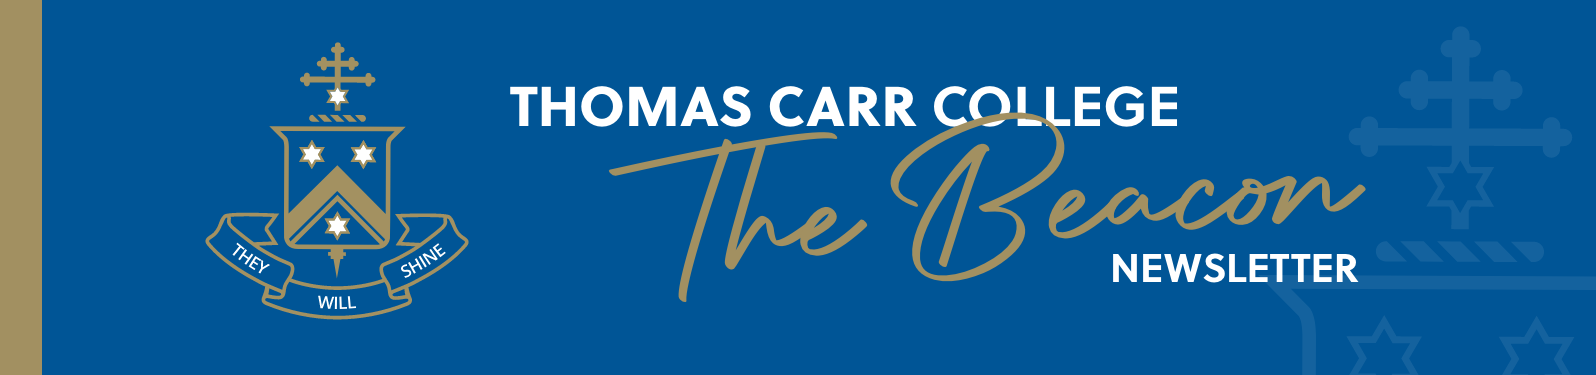 Thomas Carr College Newsletter Banner